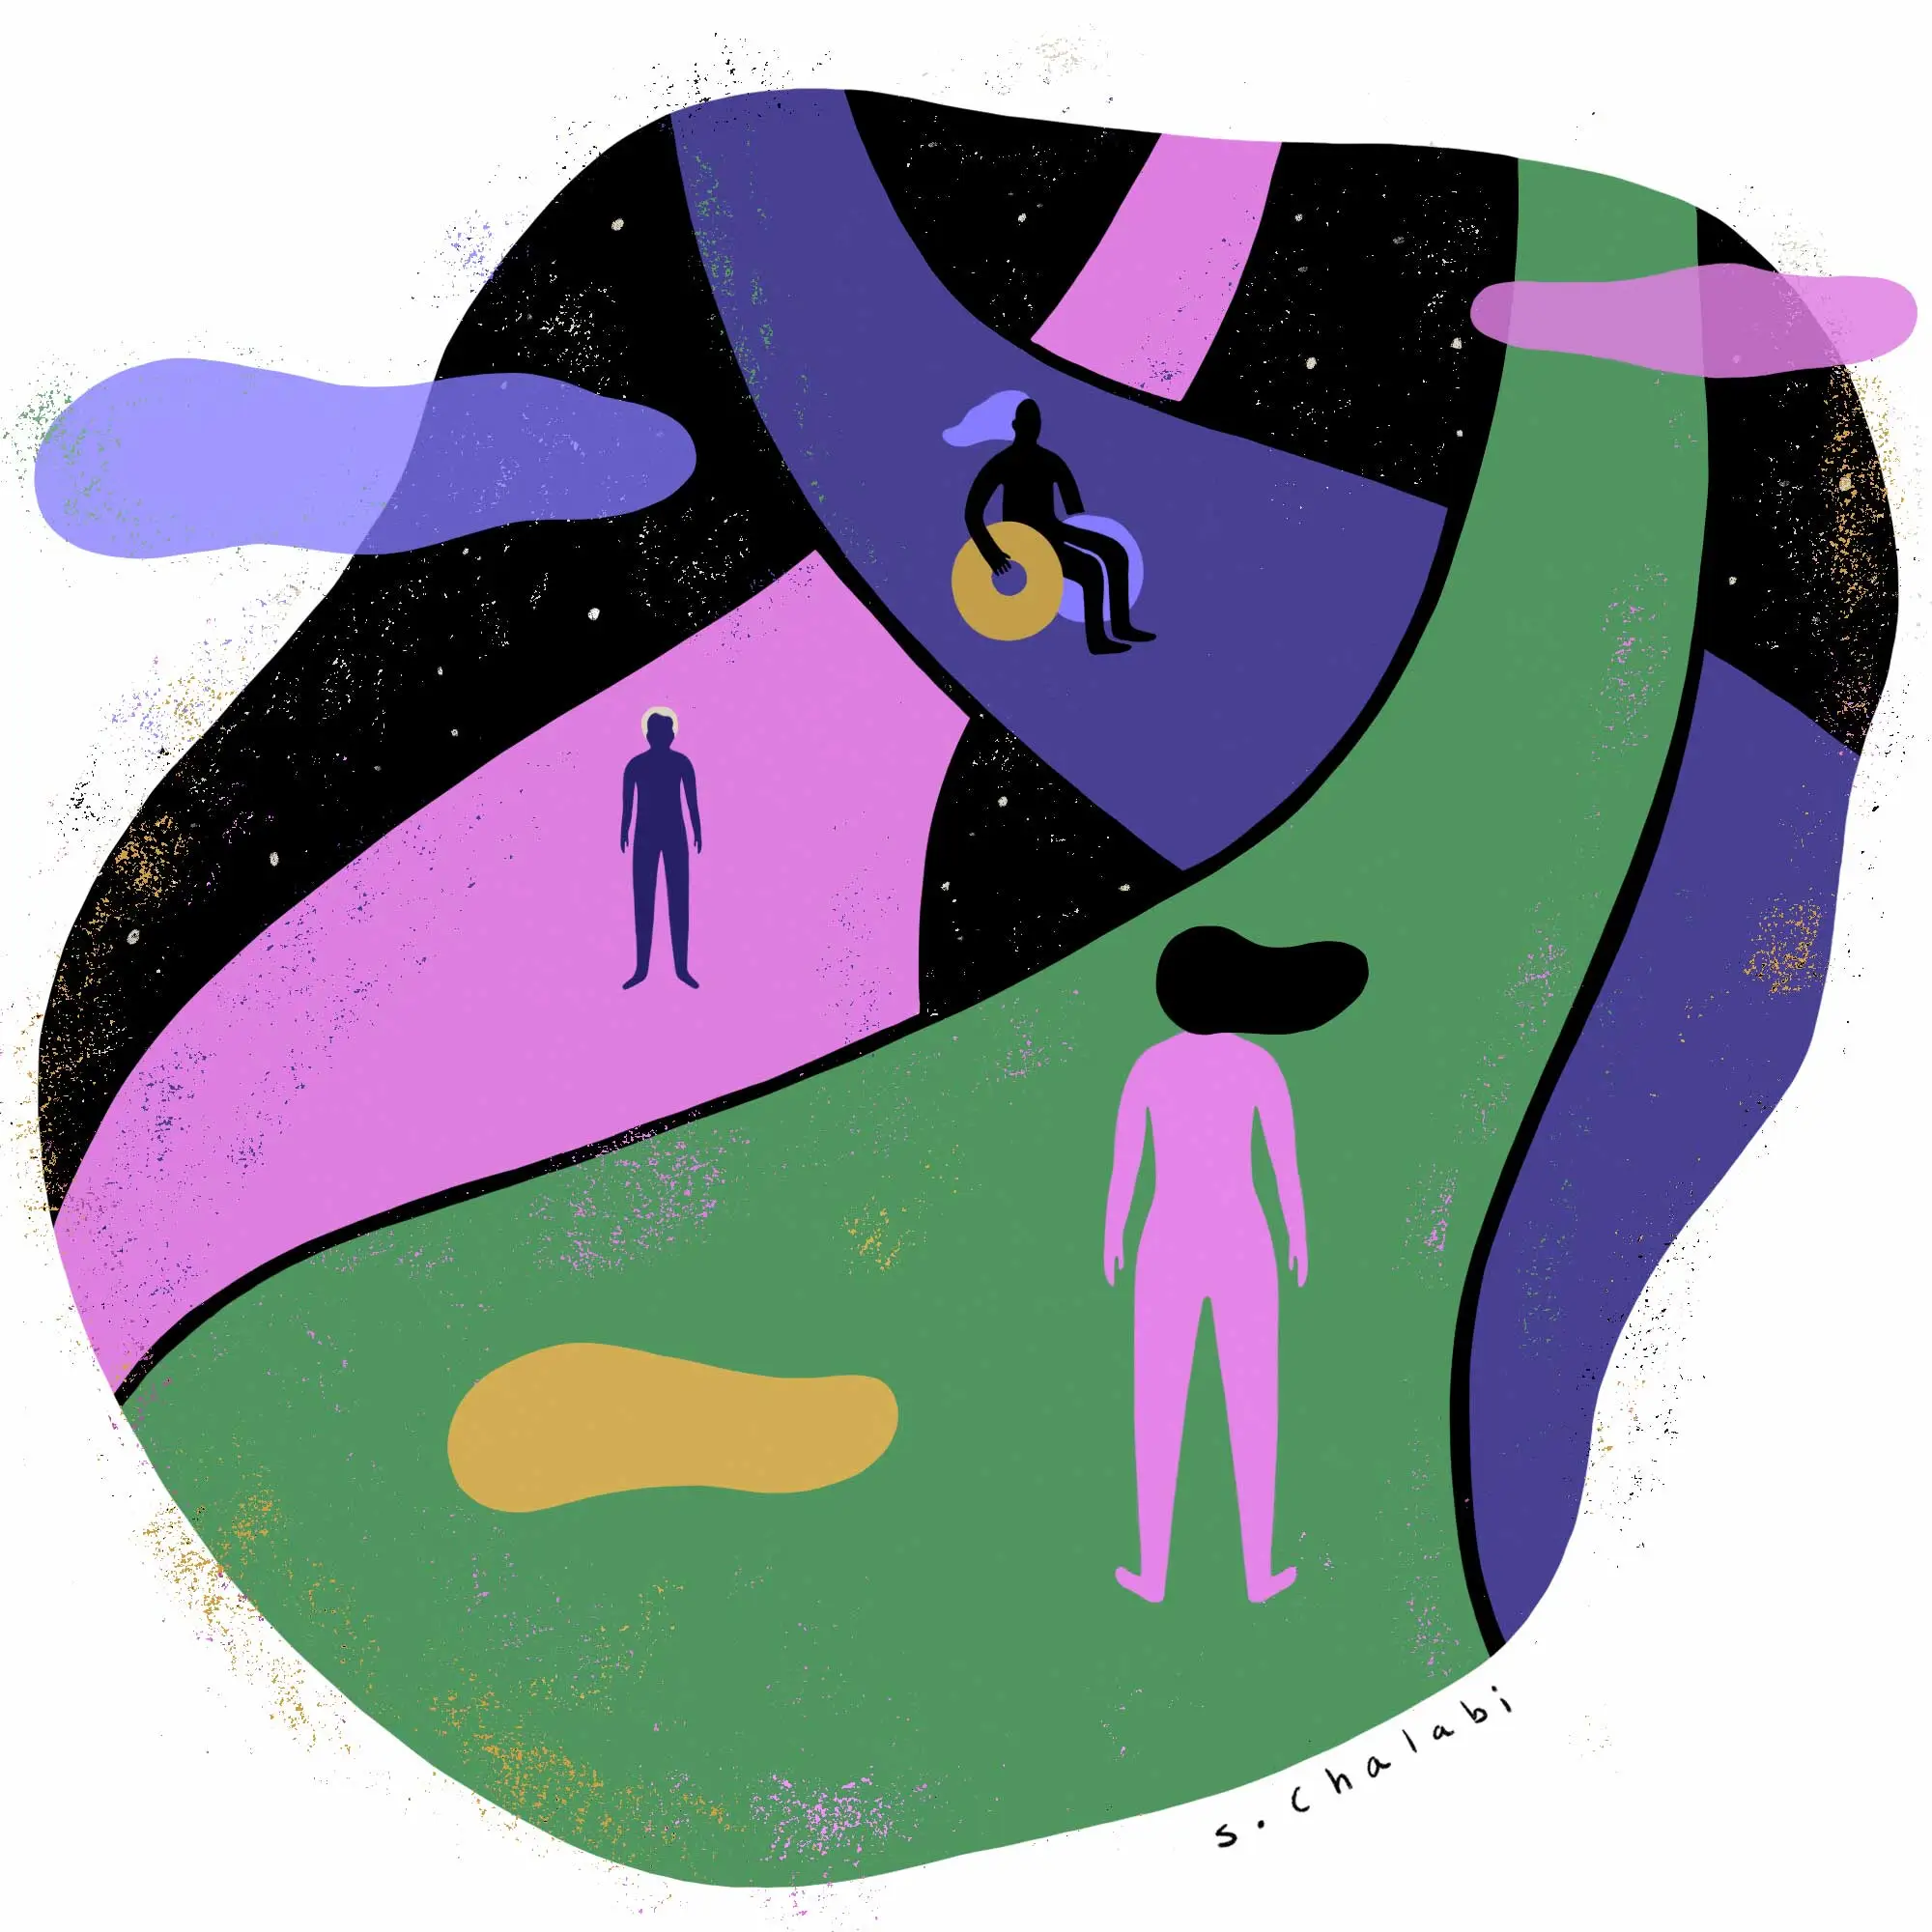 Three figures on three winding and intersecting pathways in space. In the foreground, a pink figure stands with hair blowing. In the background, a dark purple figure stands and a black figure moves in a wheelchair. 